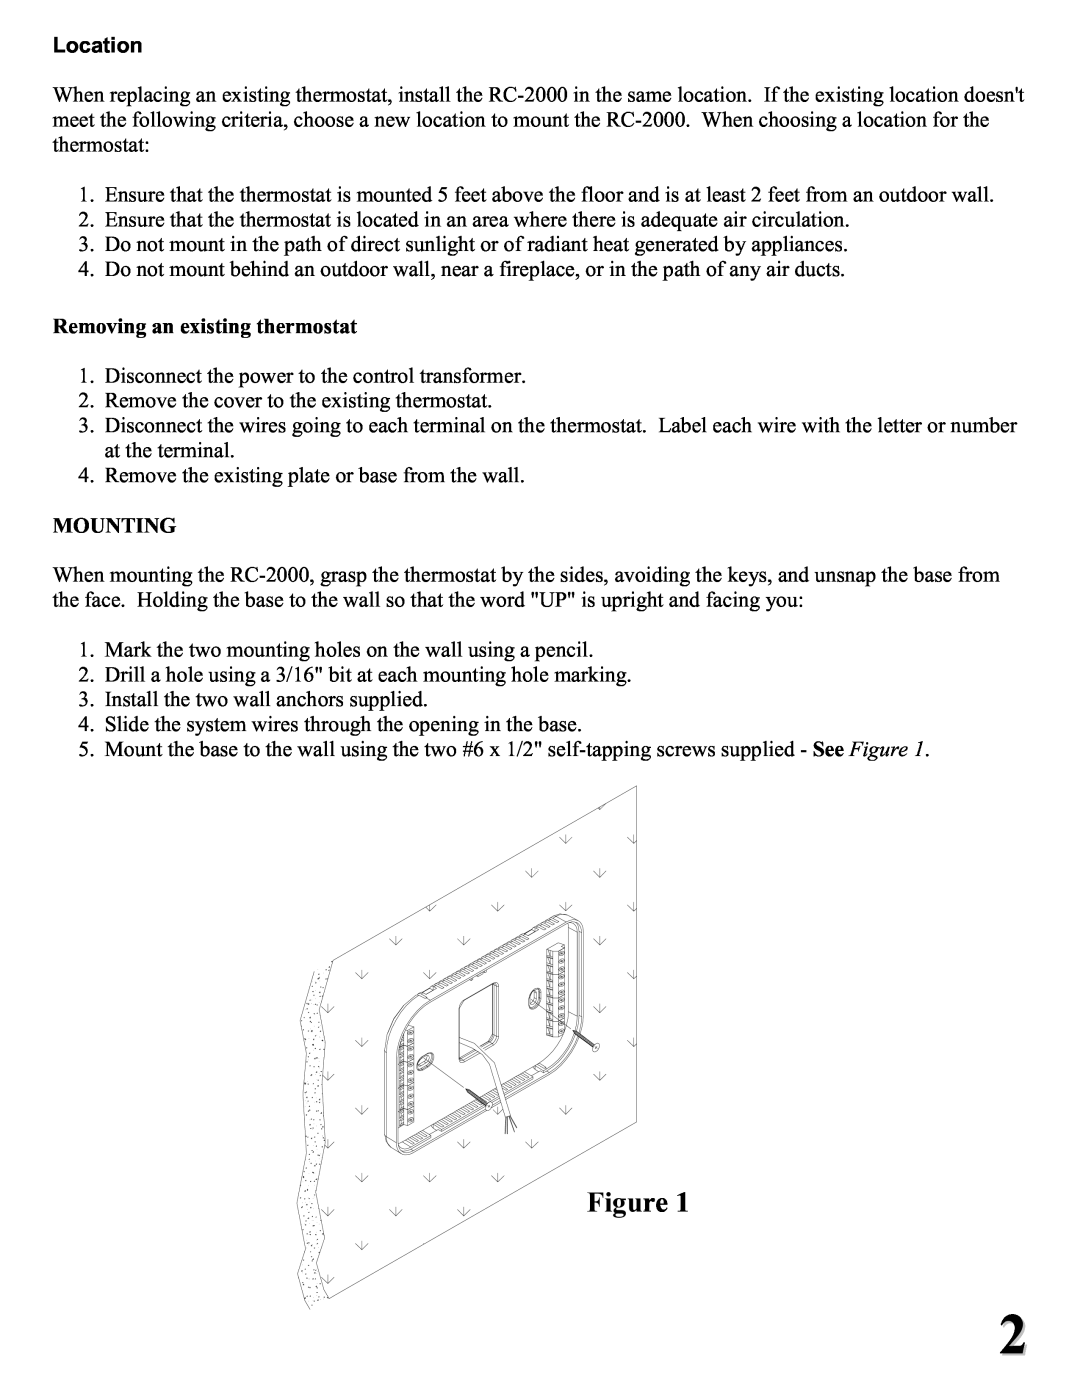 Home Automation RC-2000 installation instructions Location, Removing an existing thermostat, Mounting 